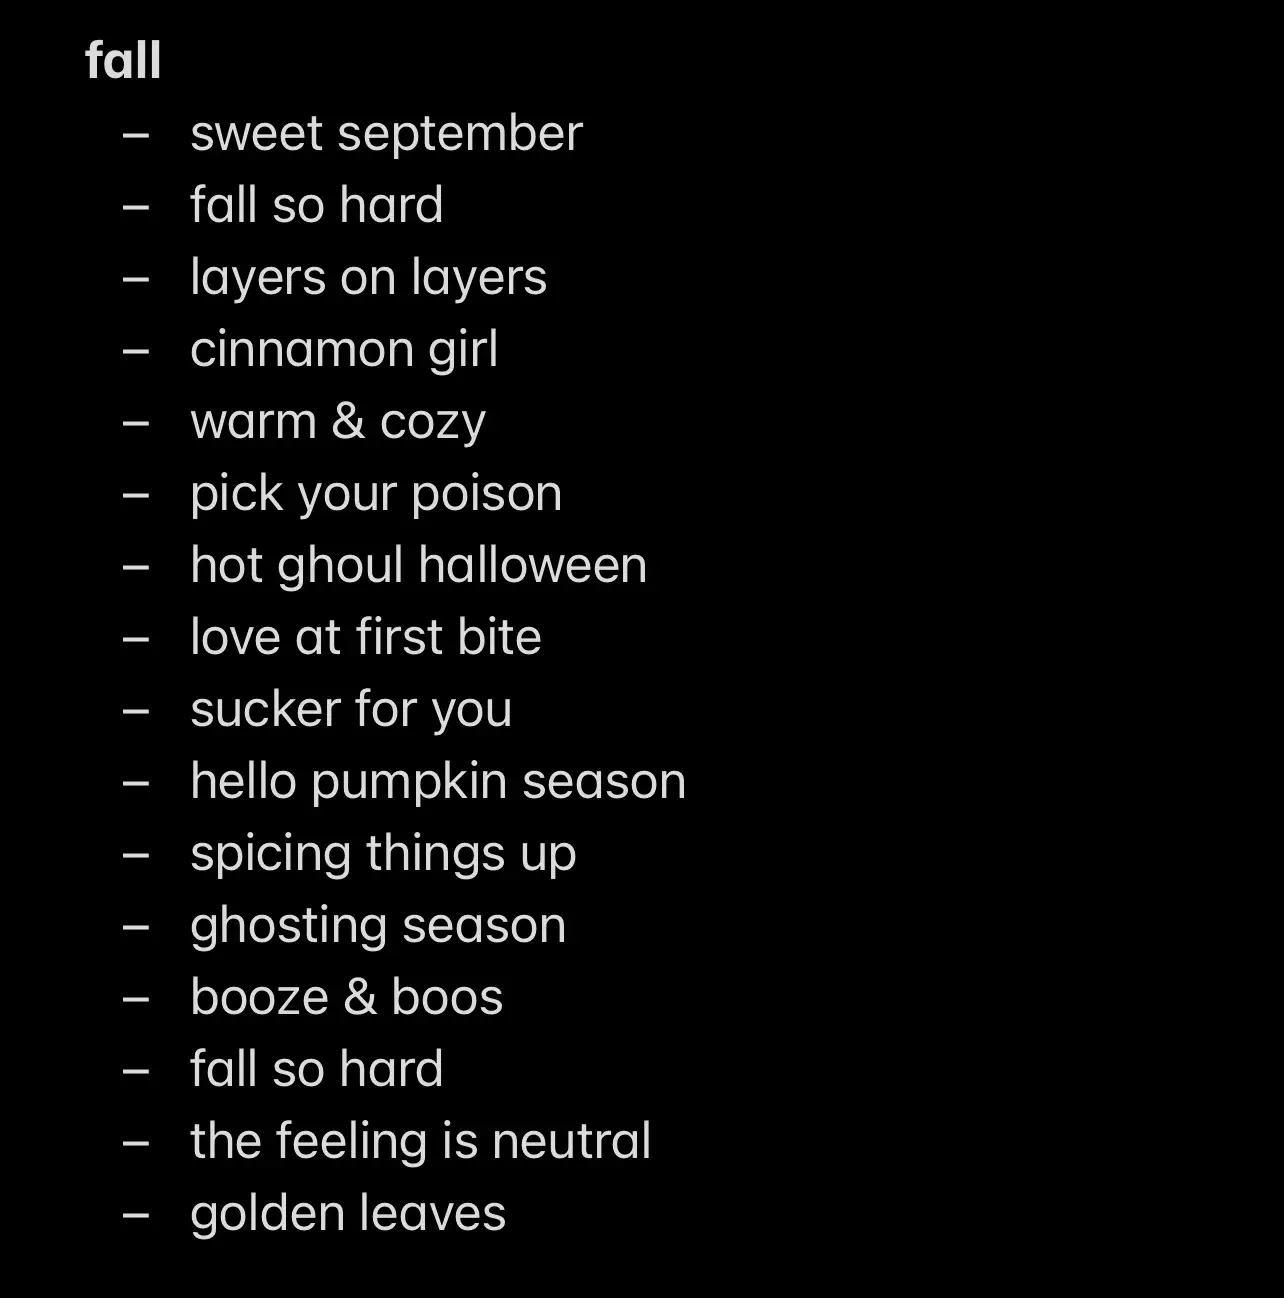  A list of things to do in autumn with a